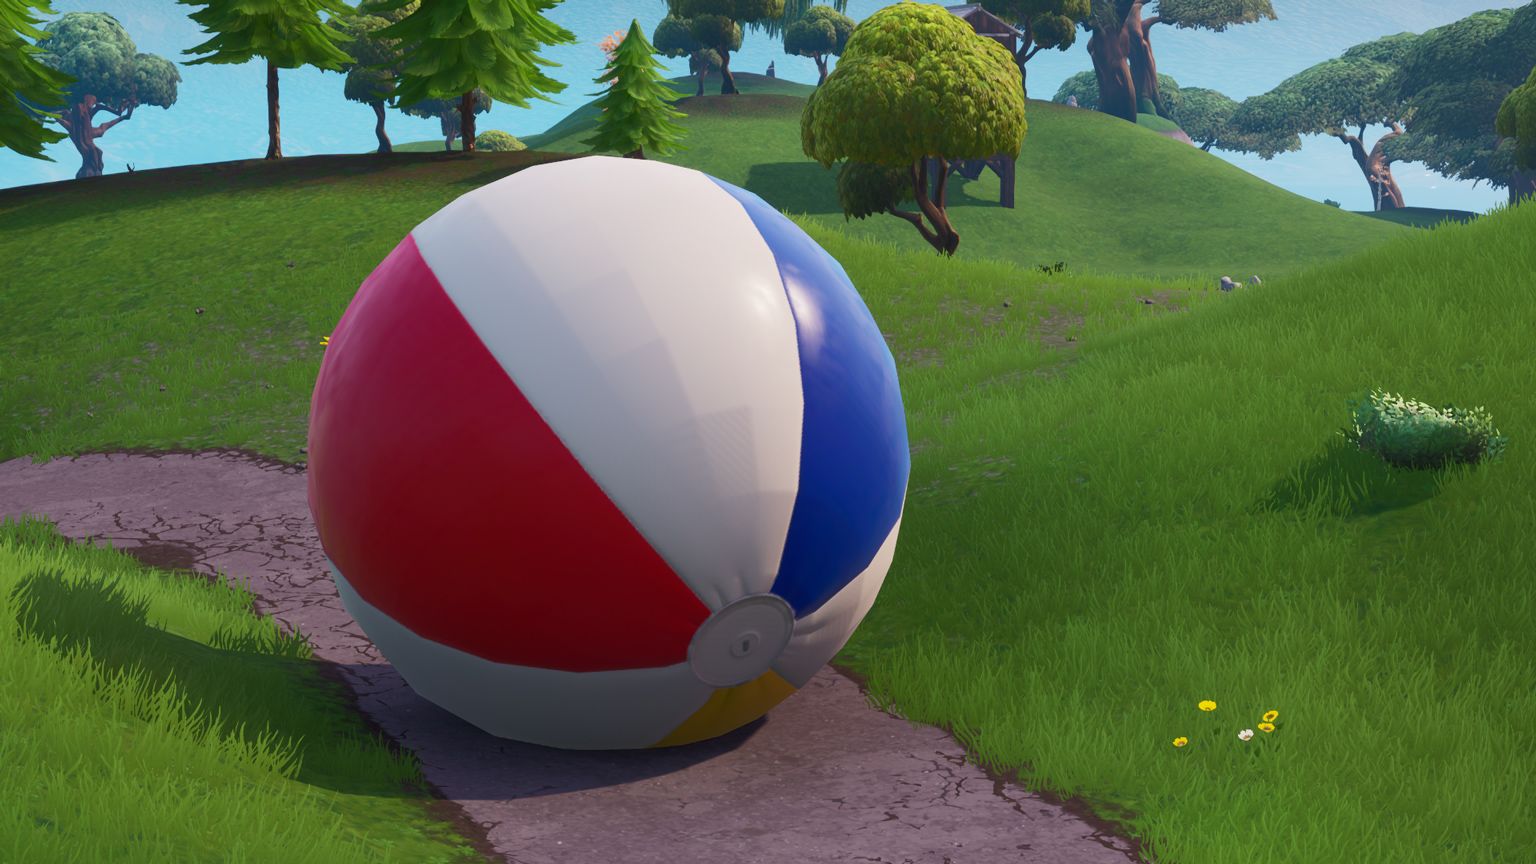 Fortnite 14 Days of Summer - Bounce a giant beach ball in different matches location guide